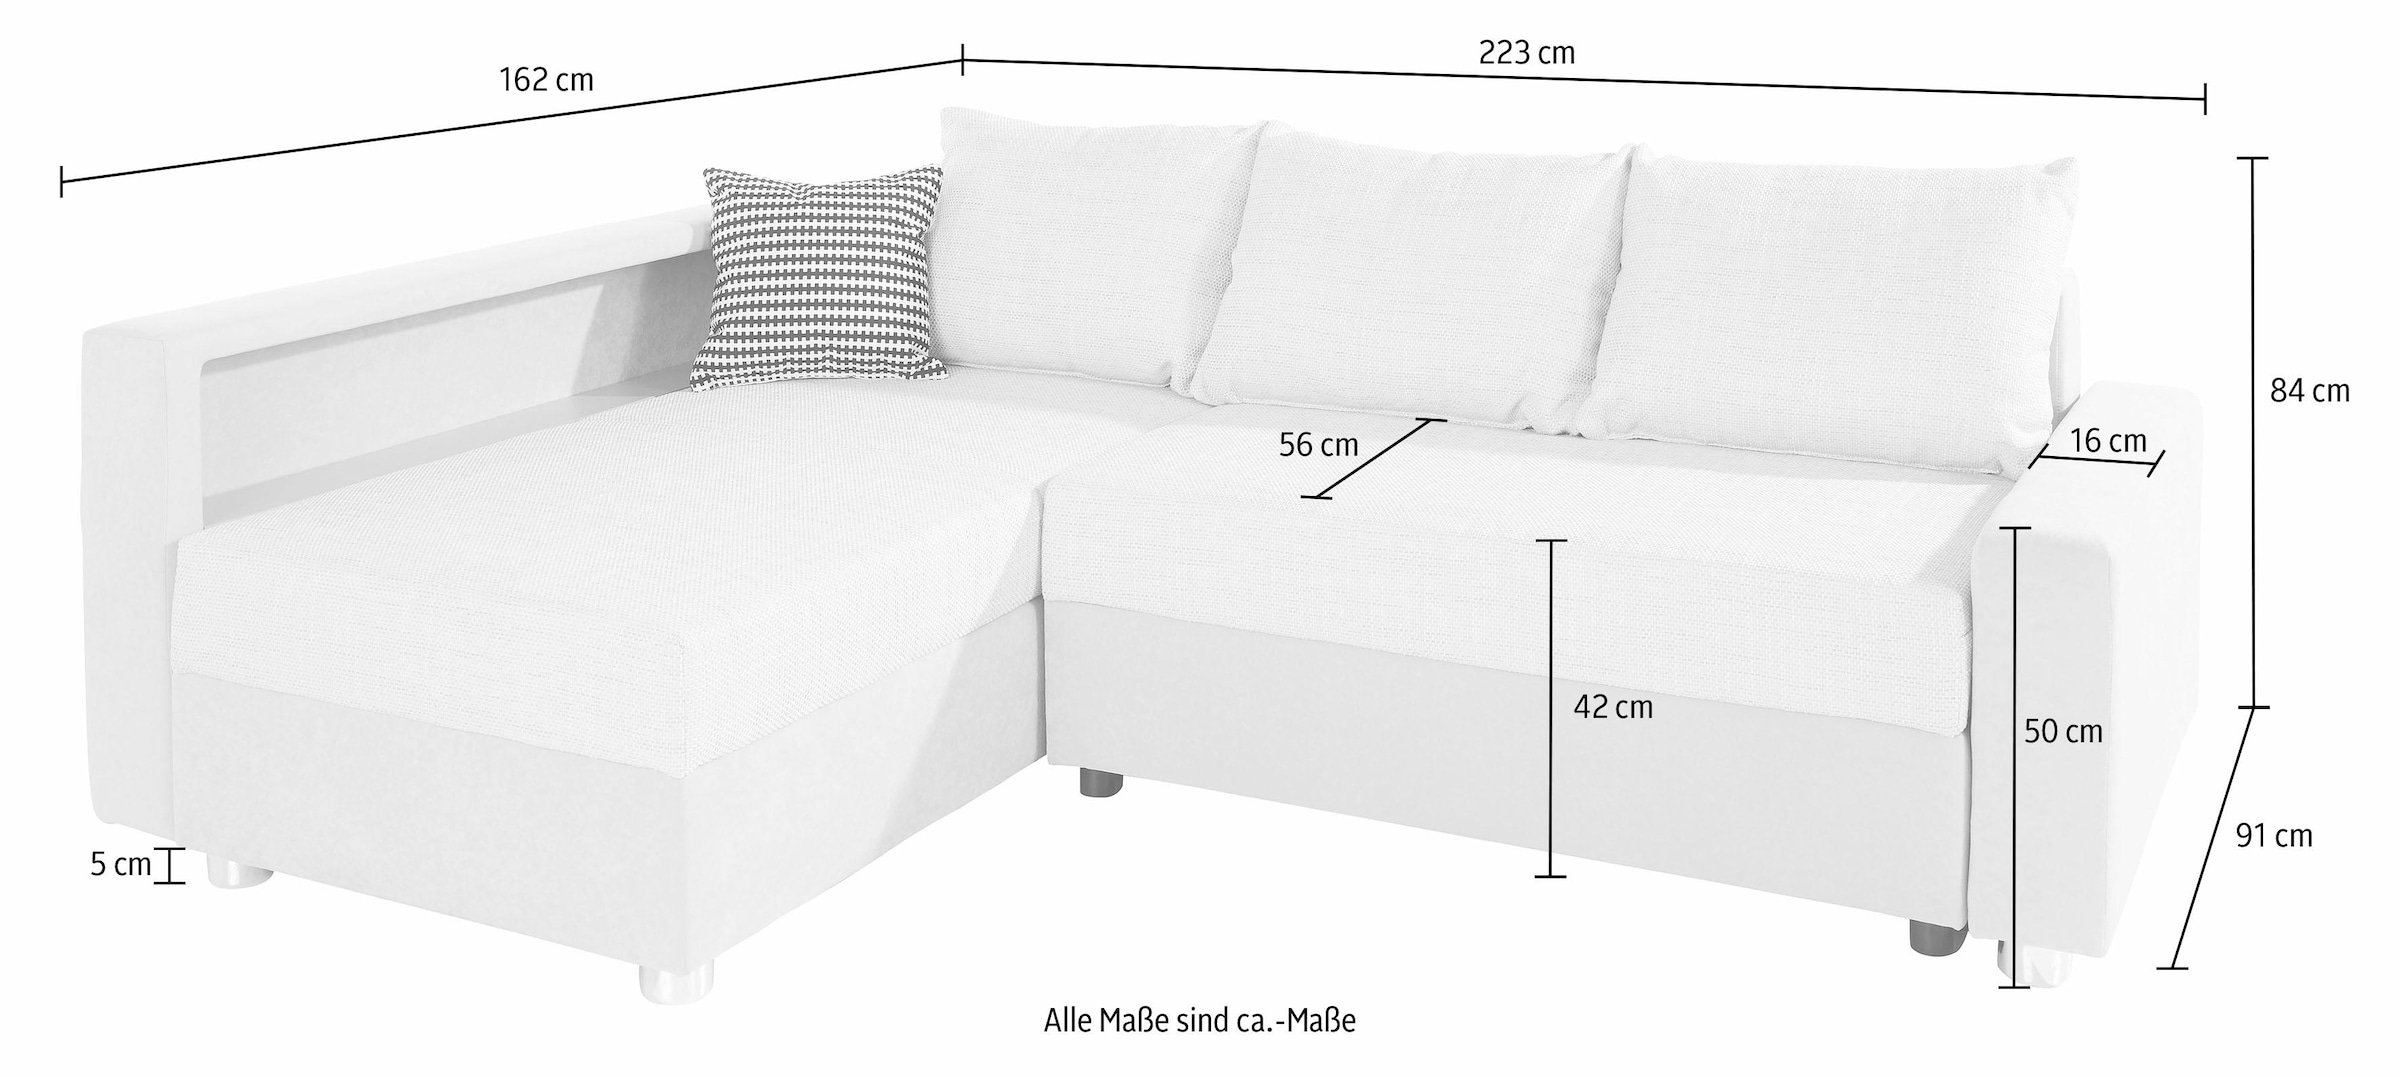 COLLECTION AB Ecksofa »Relax«, inklusive RGB-LED-Beleuchtung mit Bettfunktion, Federkern, wahlweise